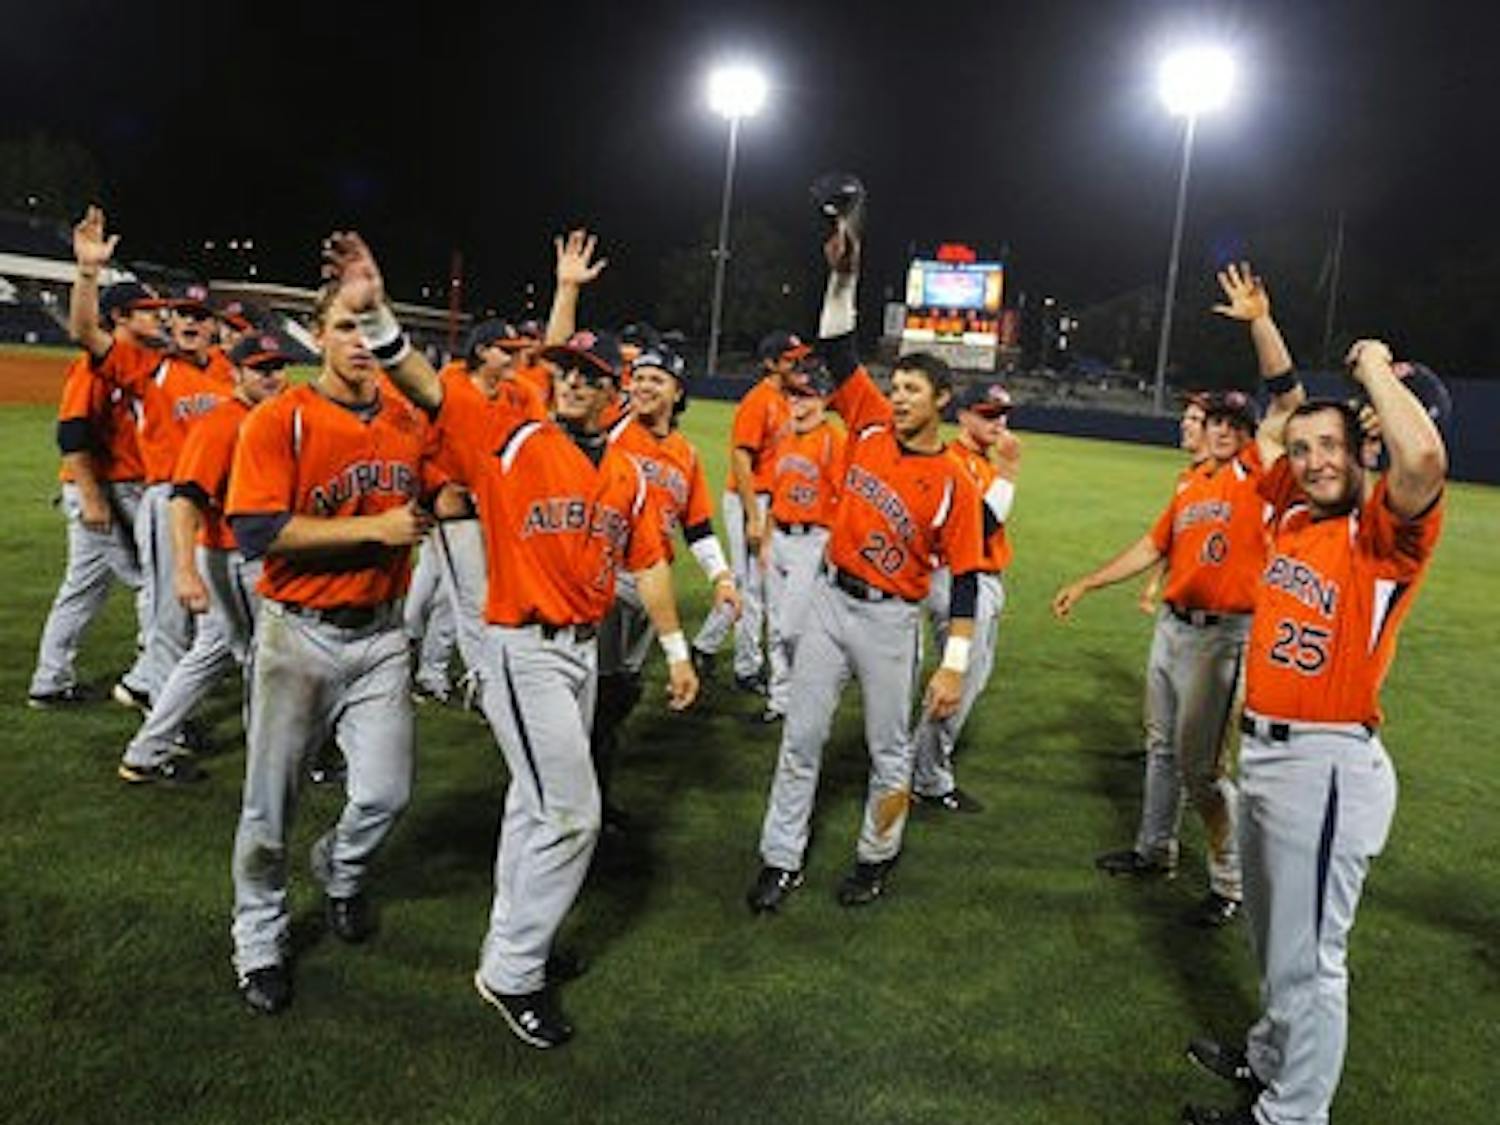 Auburn celebrates its 18-4 win over Ole Miss after winning the SEC West May 21, 2010. (Todd van emst / media relations)